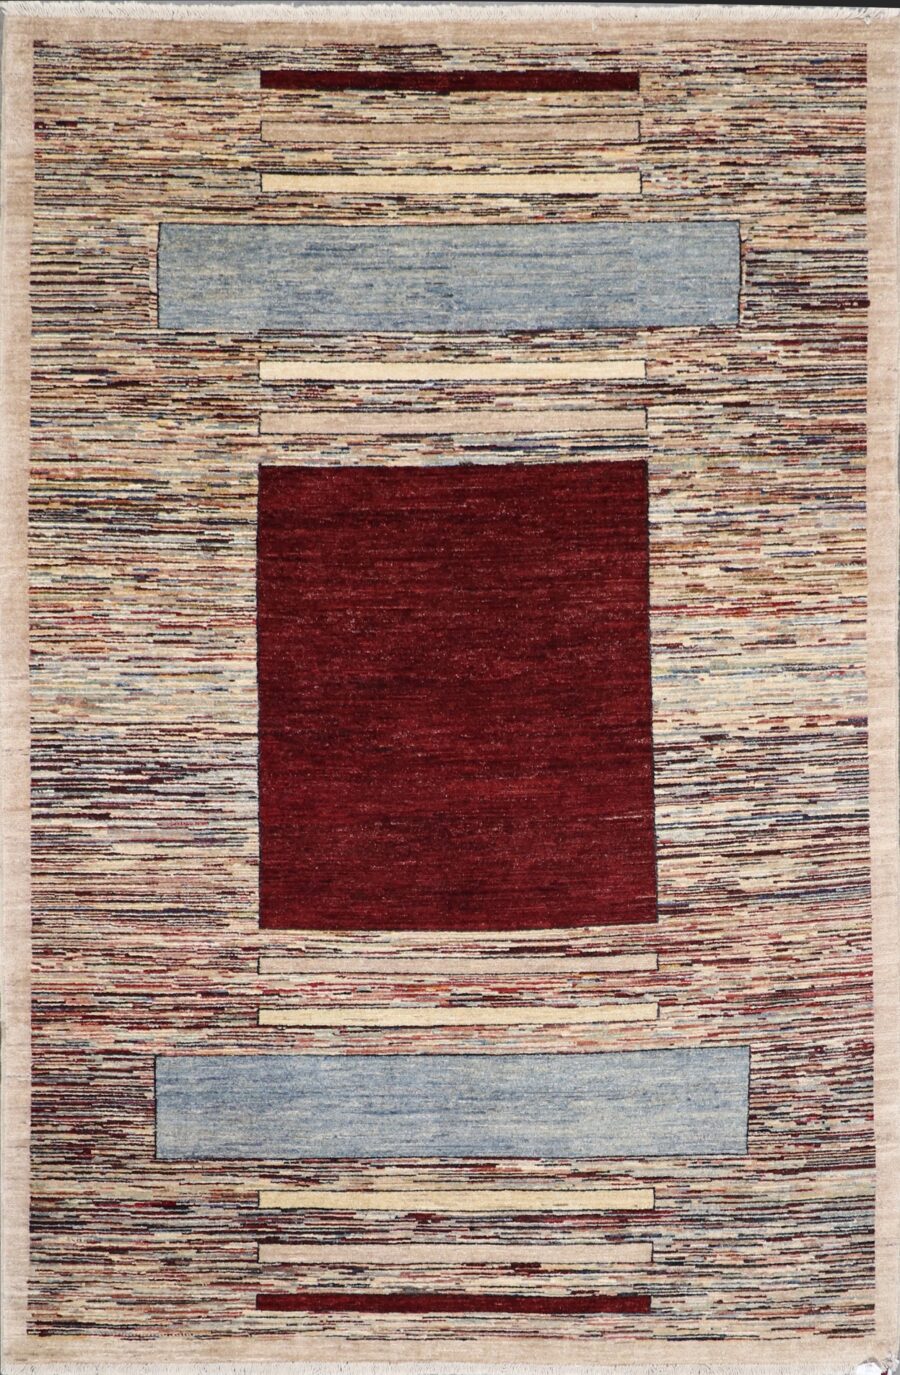 5'7"x8'4" Contemporary Burgundy Wool Hand-Knotted Rug - Direct Rug Import | Rugs in Chicago, Indiana,South Bend,Granger